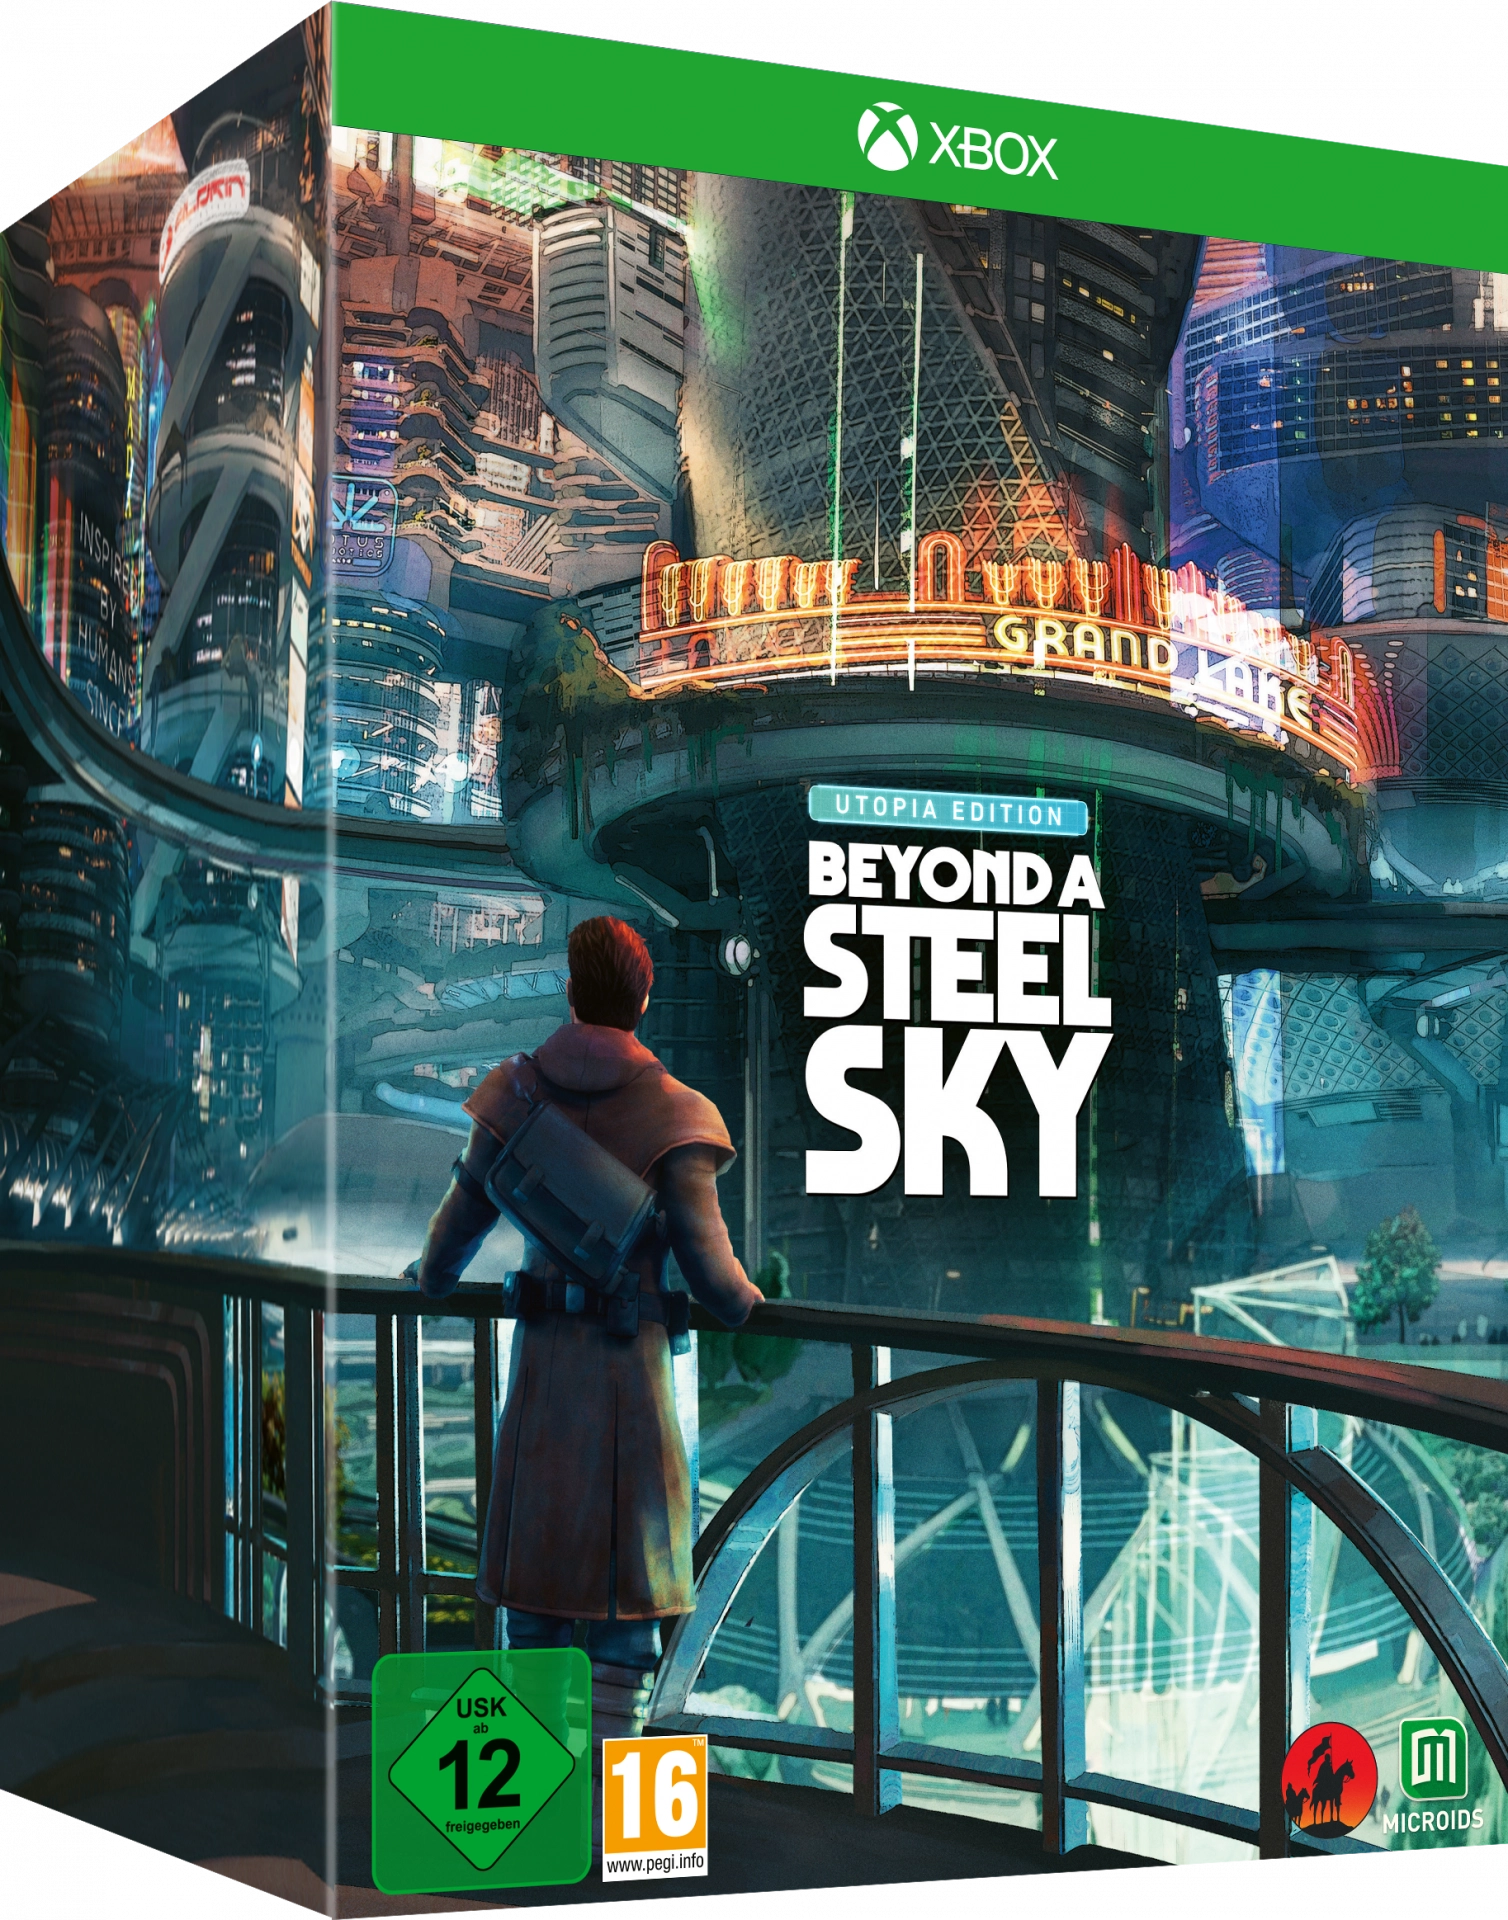 Beyond a Steel Sky - Utopia Edition (Xbox One), Revolution Software